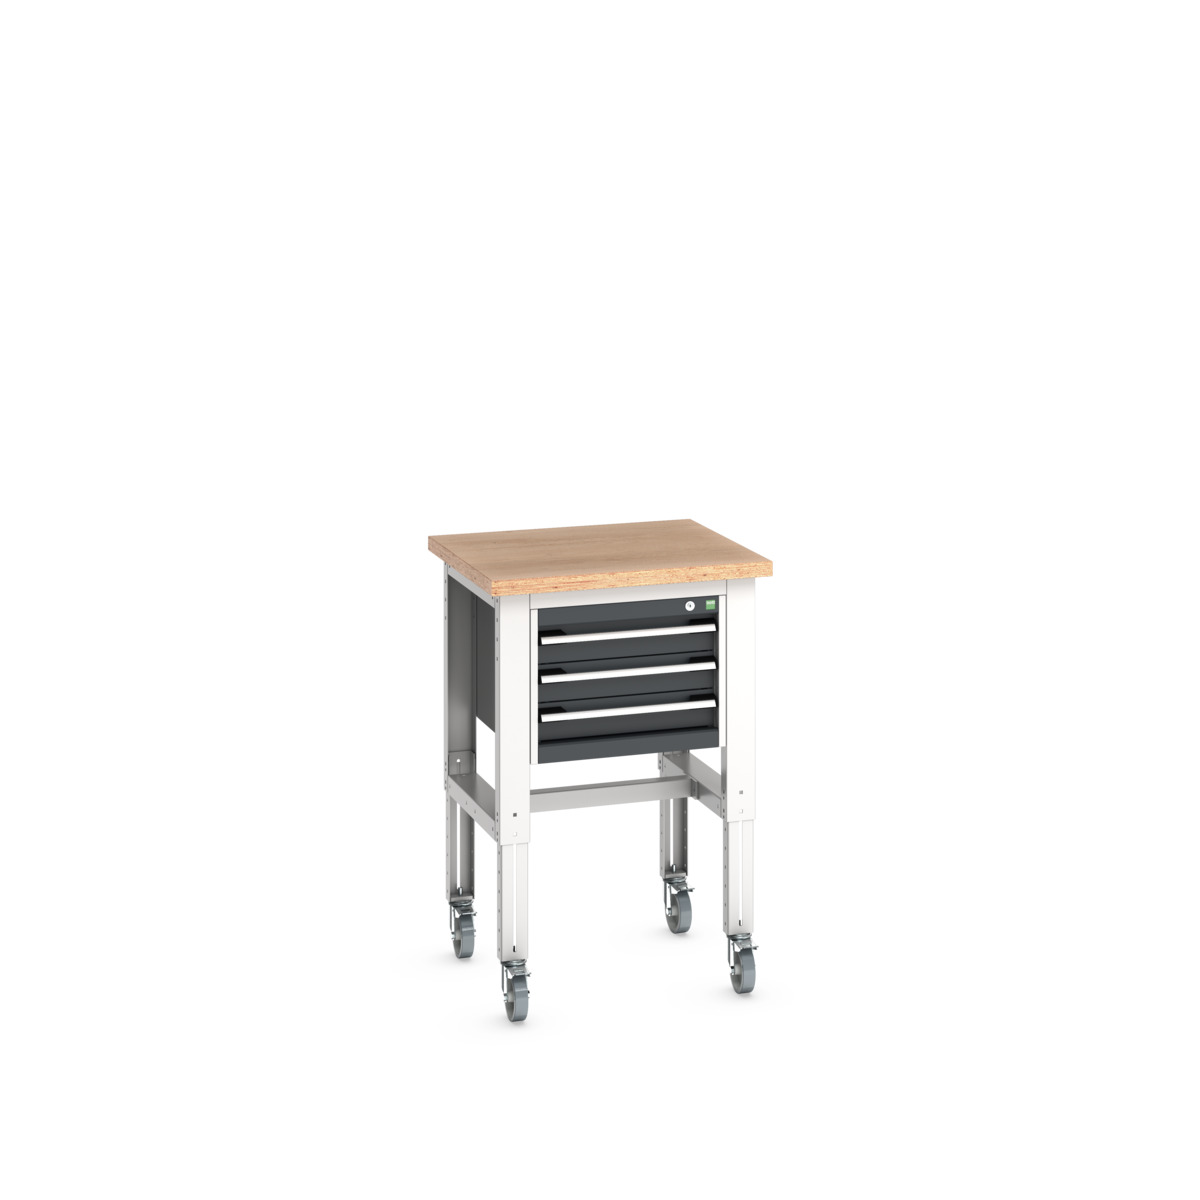 41003527. - cubio mobile bench adj height (mpx)